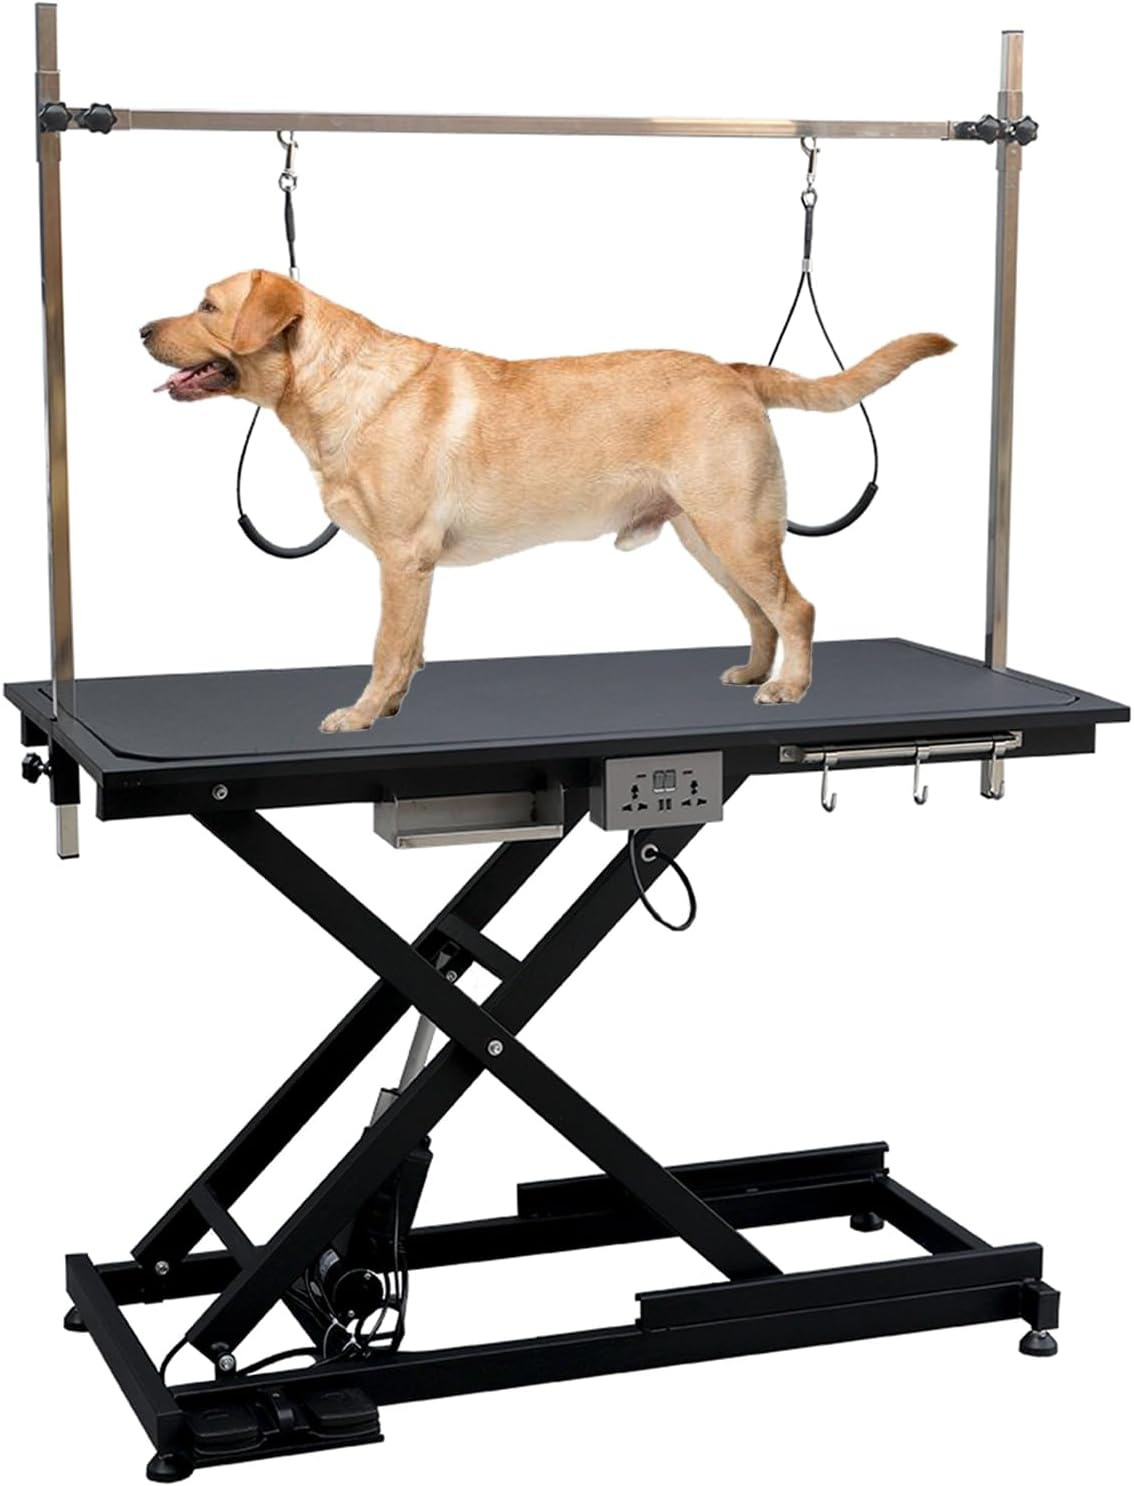 Electric Pet Dog Grooming Table, Heavy Duty Grooming Table Professional X-Lift f